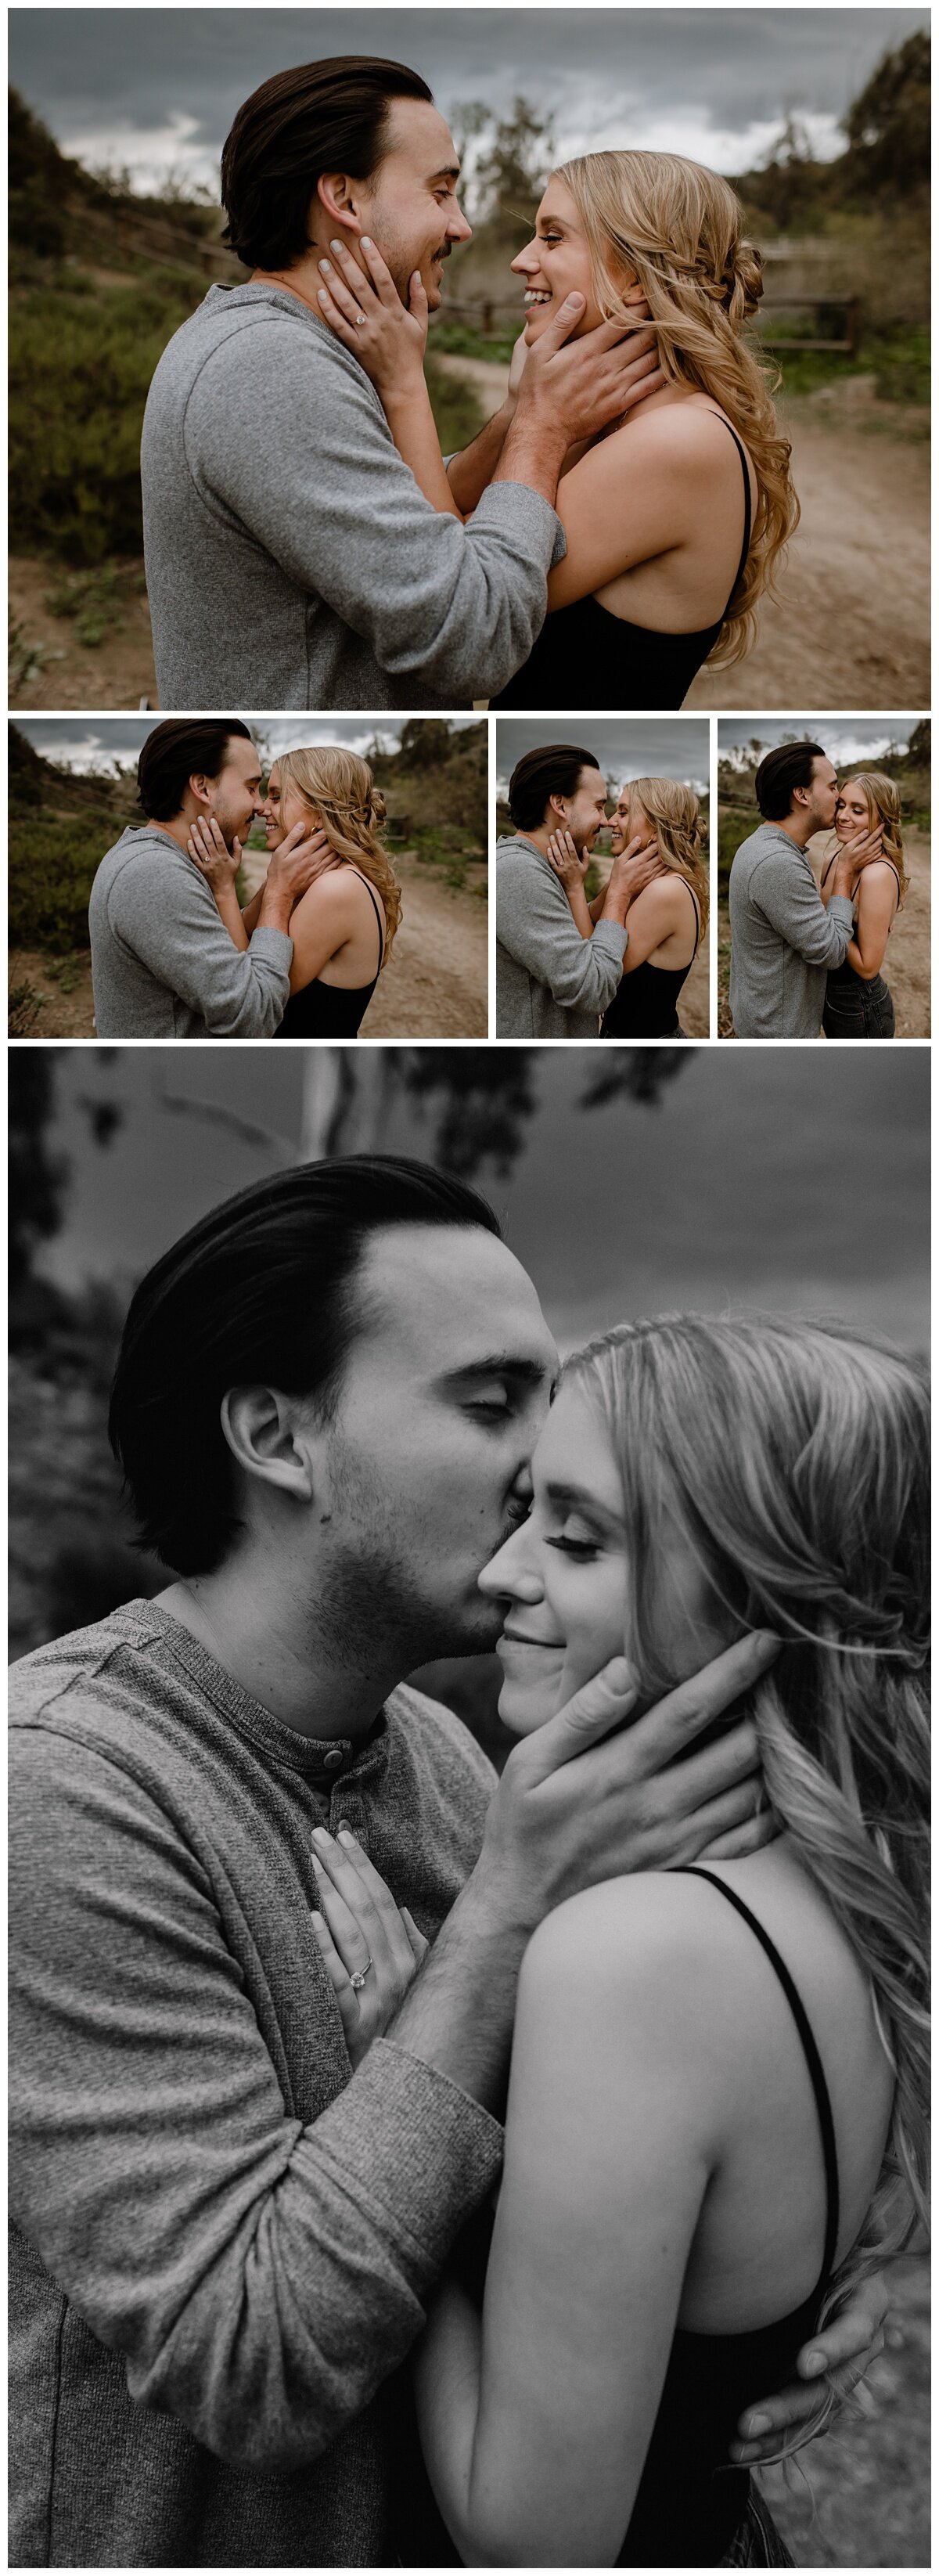 Carbon Canyon Park Orange County - Madeline and Scott Engagement Session - Eve Rox Photography-116_WEB.jpg